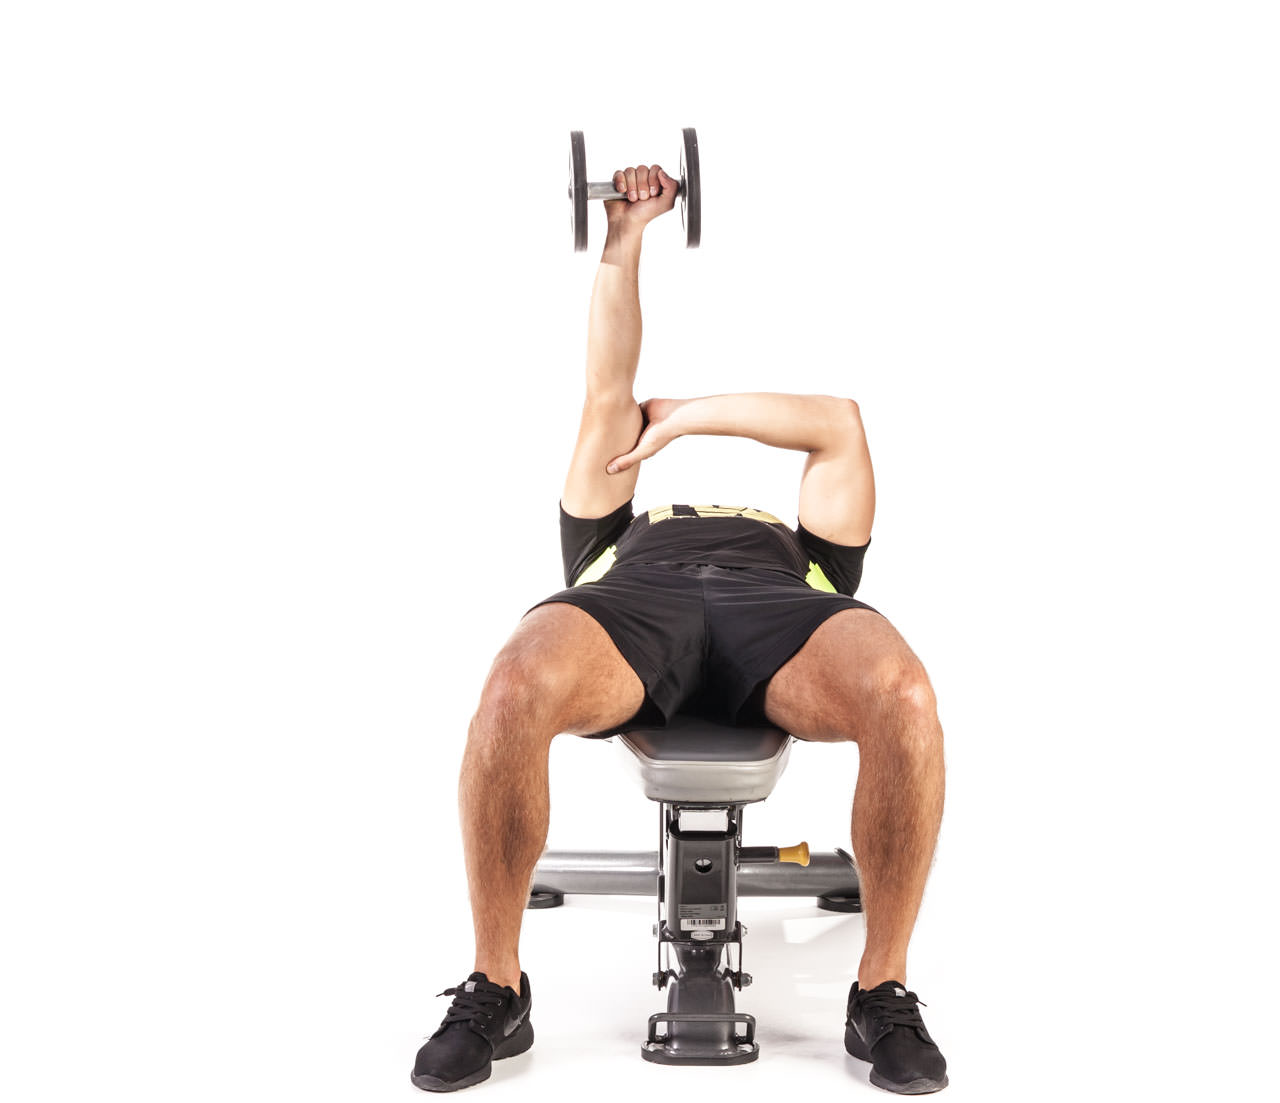 One-Arm Dumbbell Triceps Extension frame #1